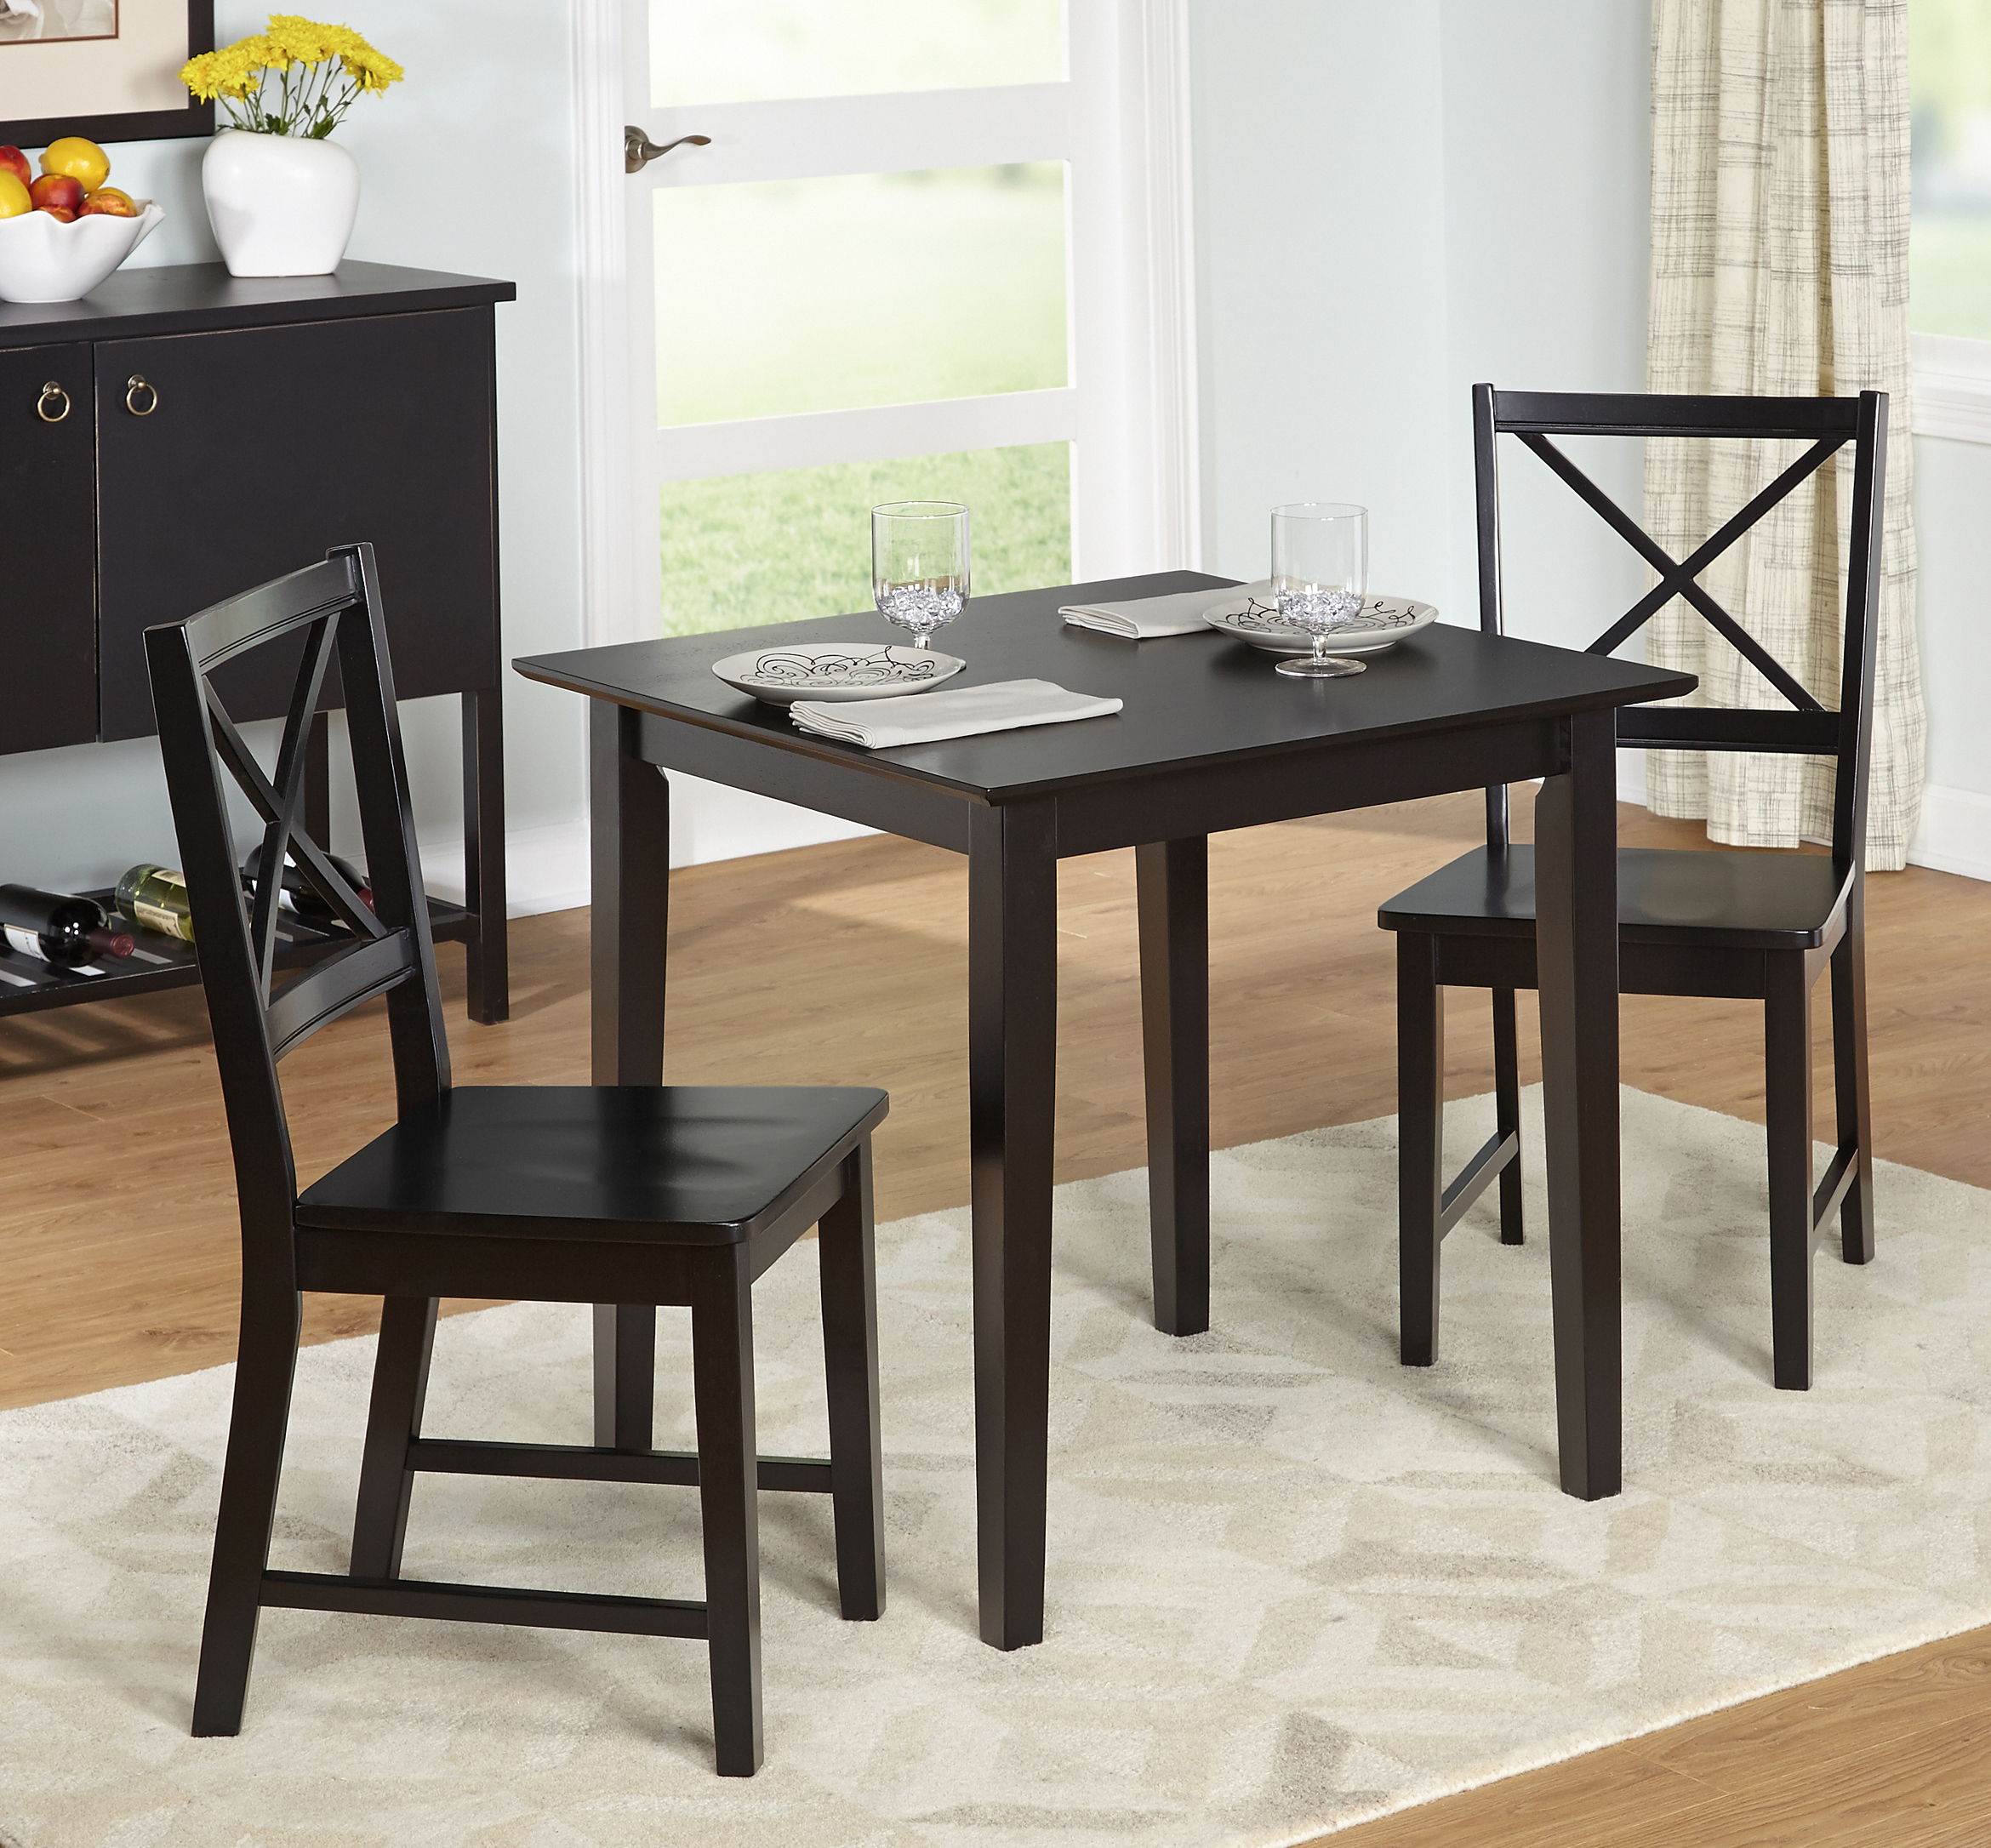 TMS Virgina Indoor Cross-Back Dining Chair, Set of 2, Black - image 3 of 6